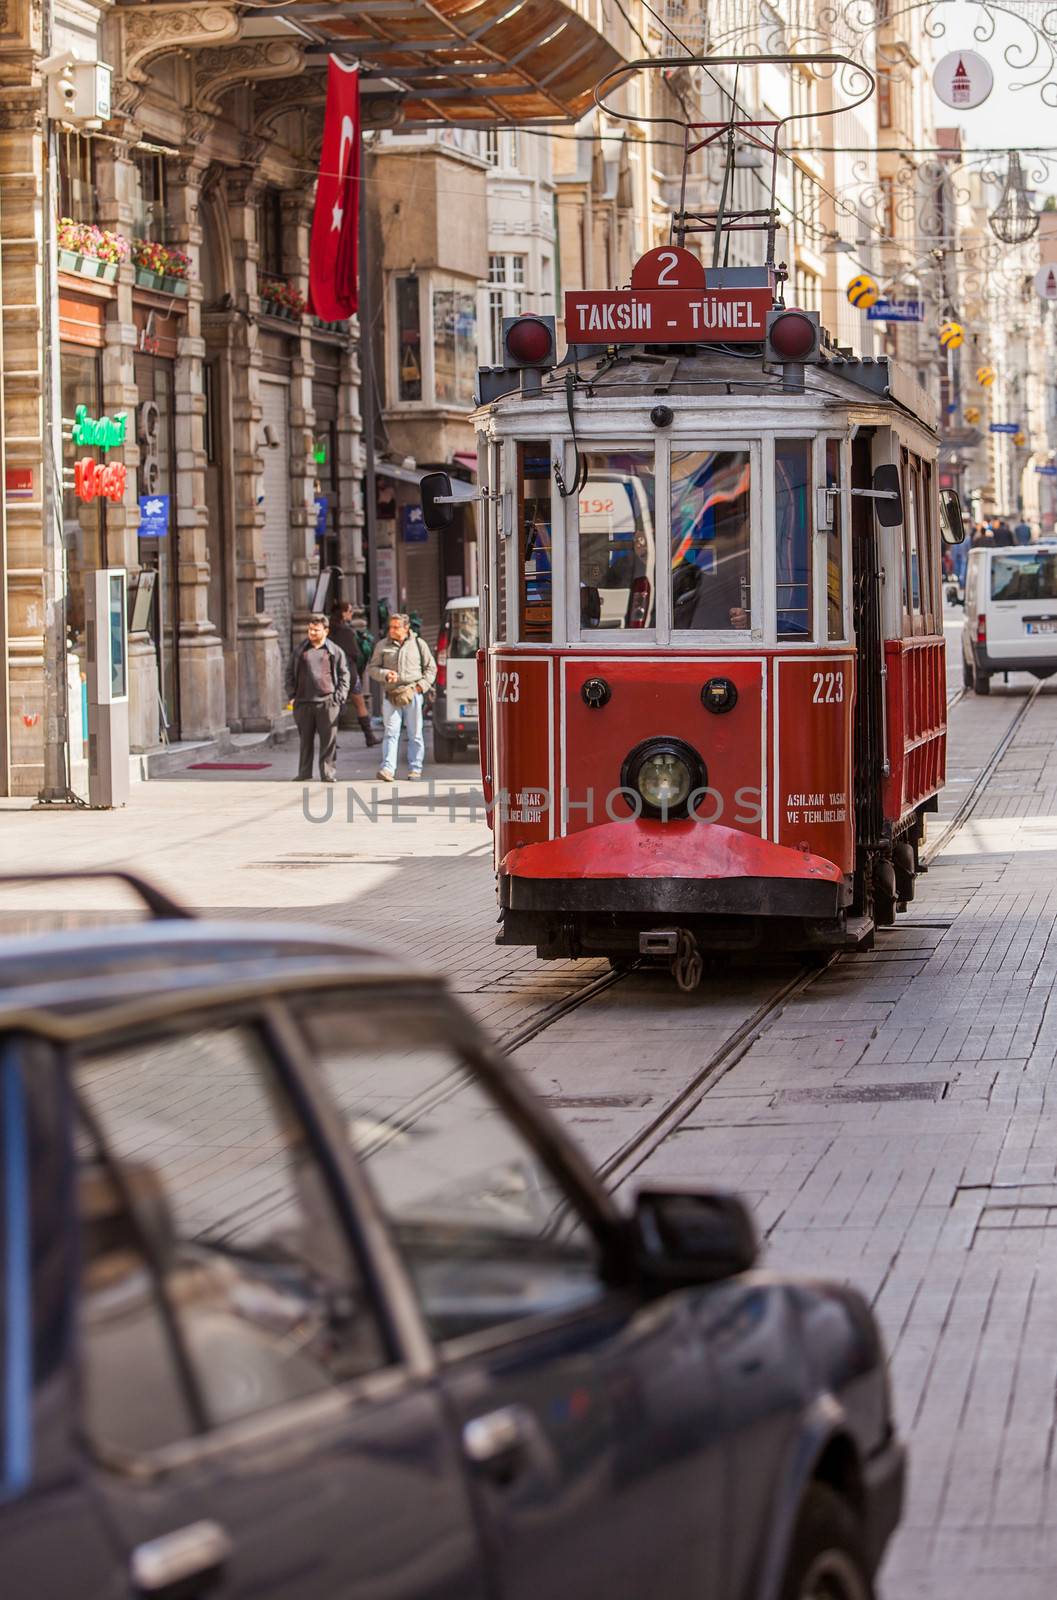 ISTANBUL, TURKEY ��� APRIL 28: Trolley car on busy street on April 28, 2012 in Istanbul, Turkey.  Each year patriotic Turks honor those fallen at the battle of Galipoli during World War I.